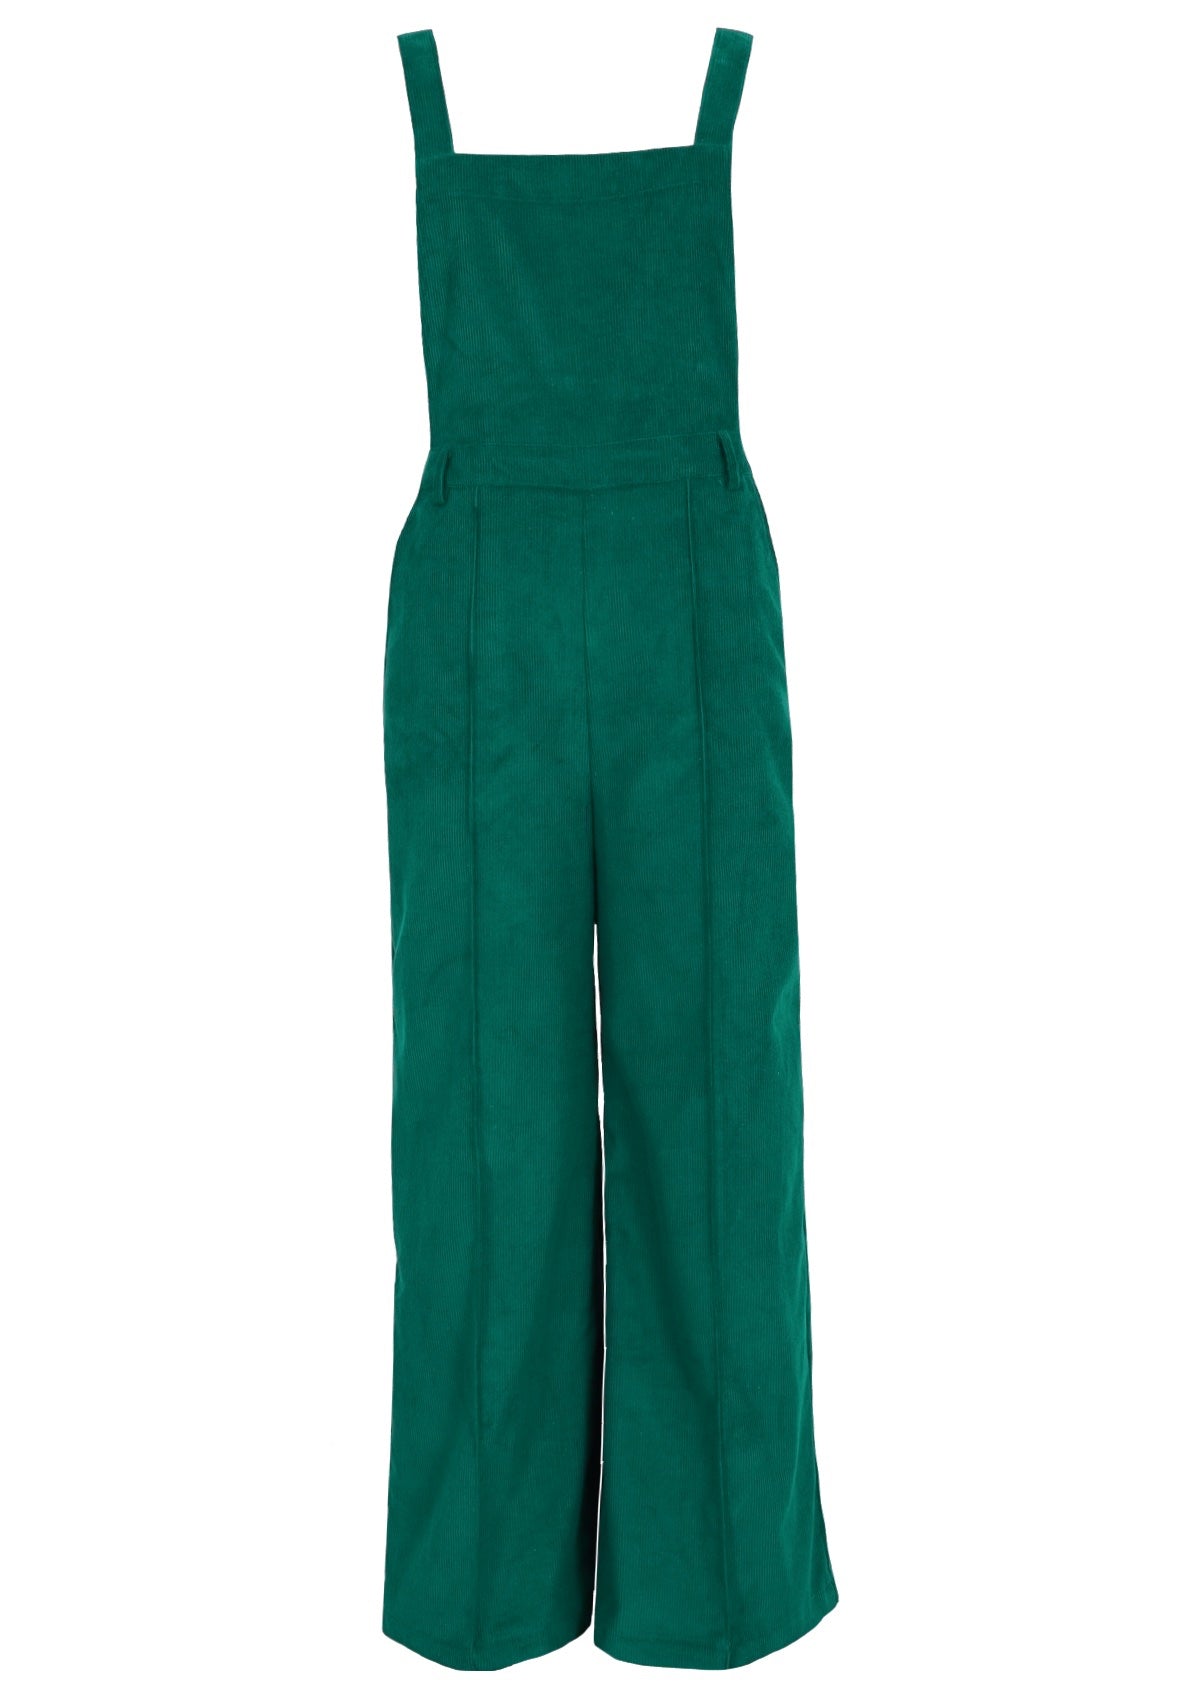 Green cotton corduroy overalls with thick, adjustable straps. 